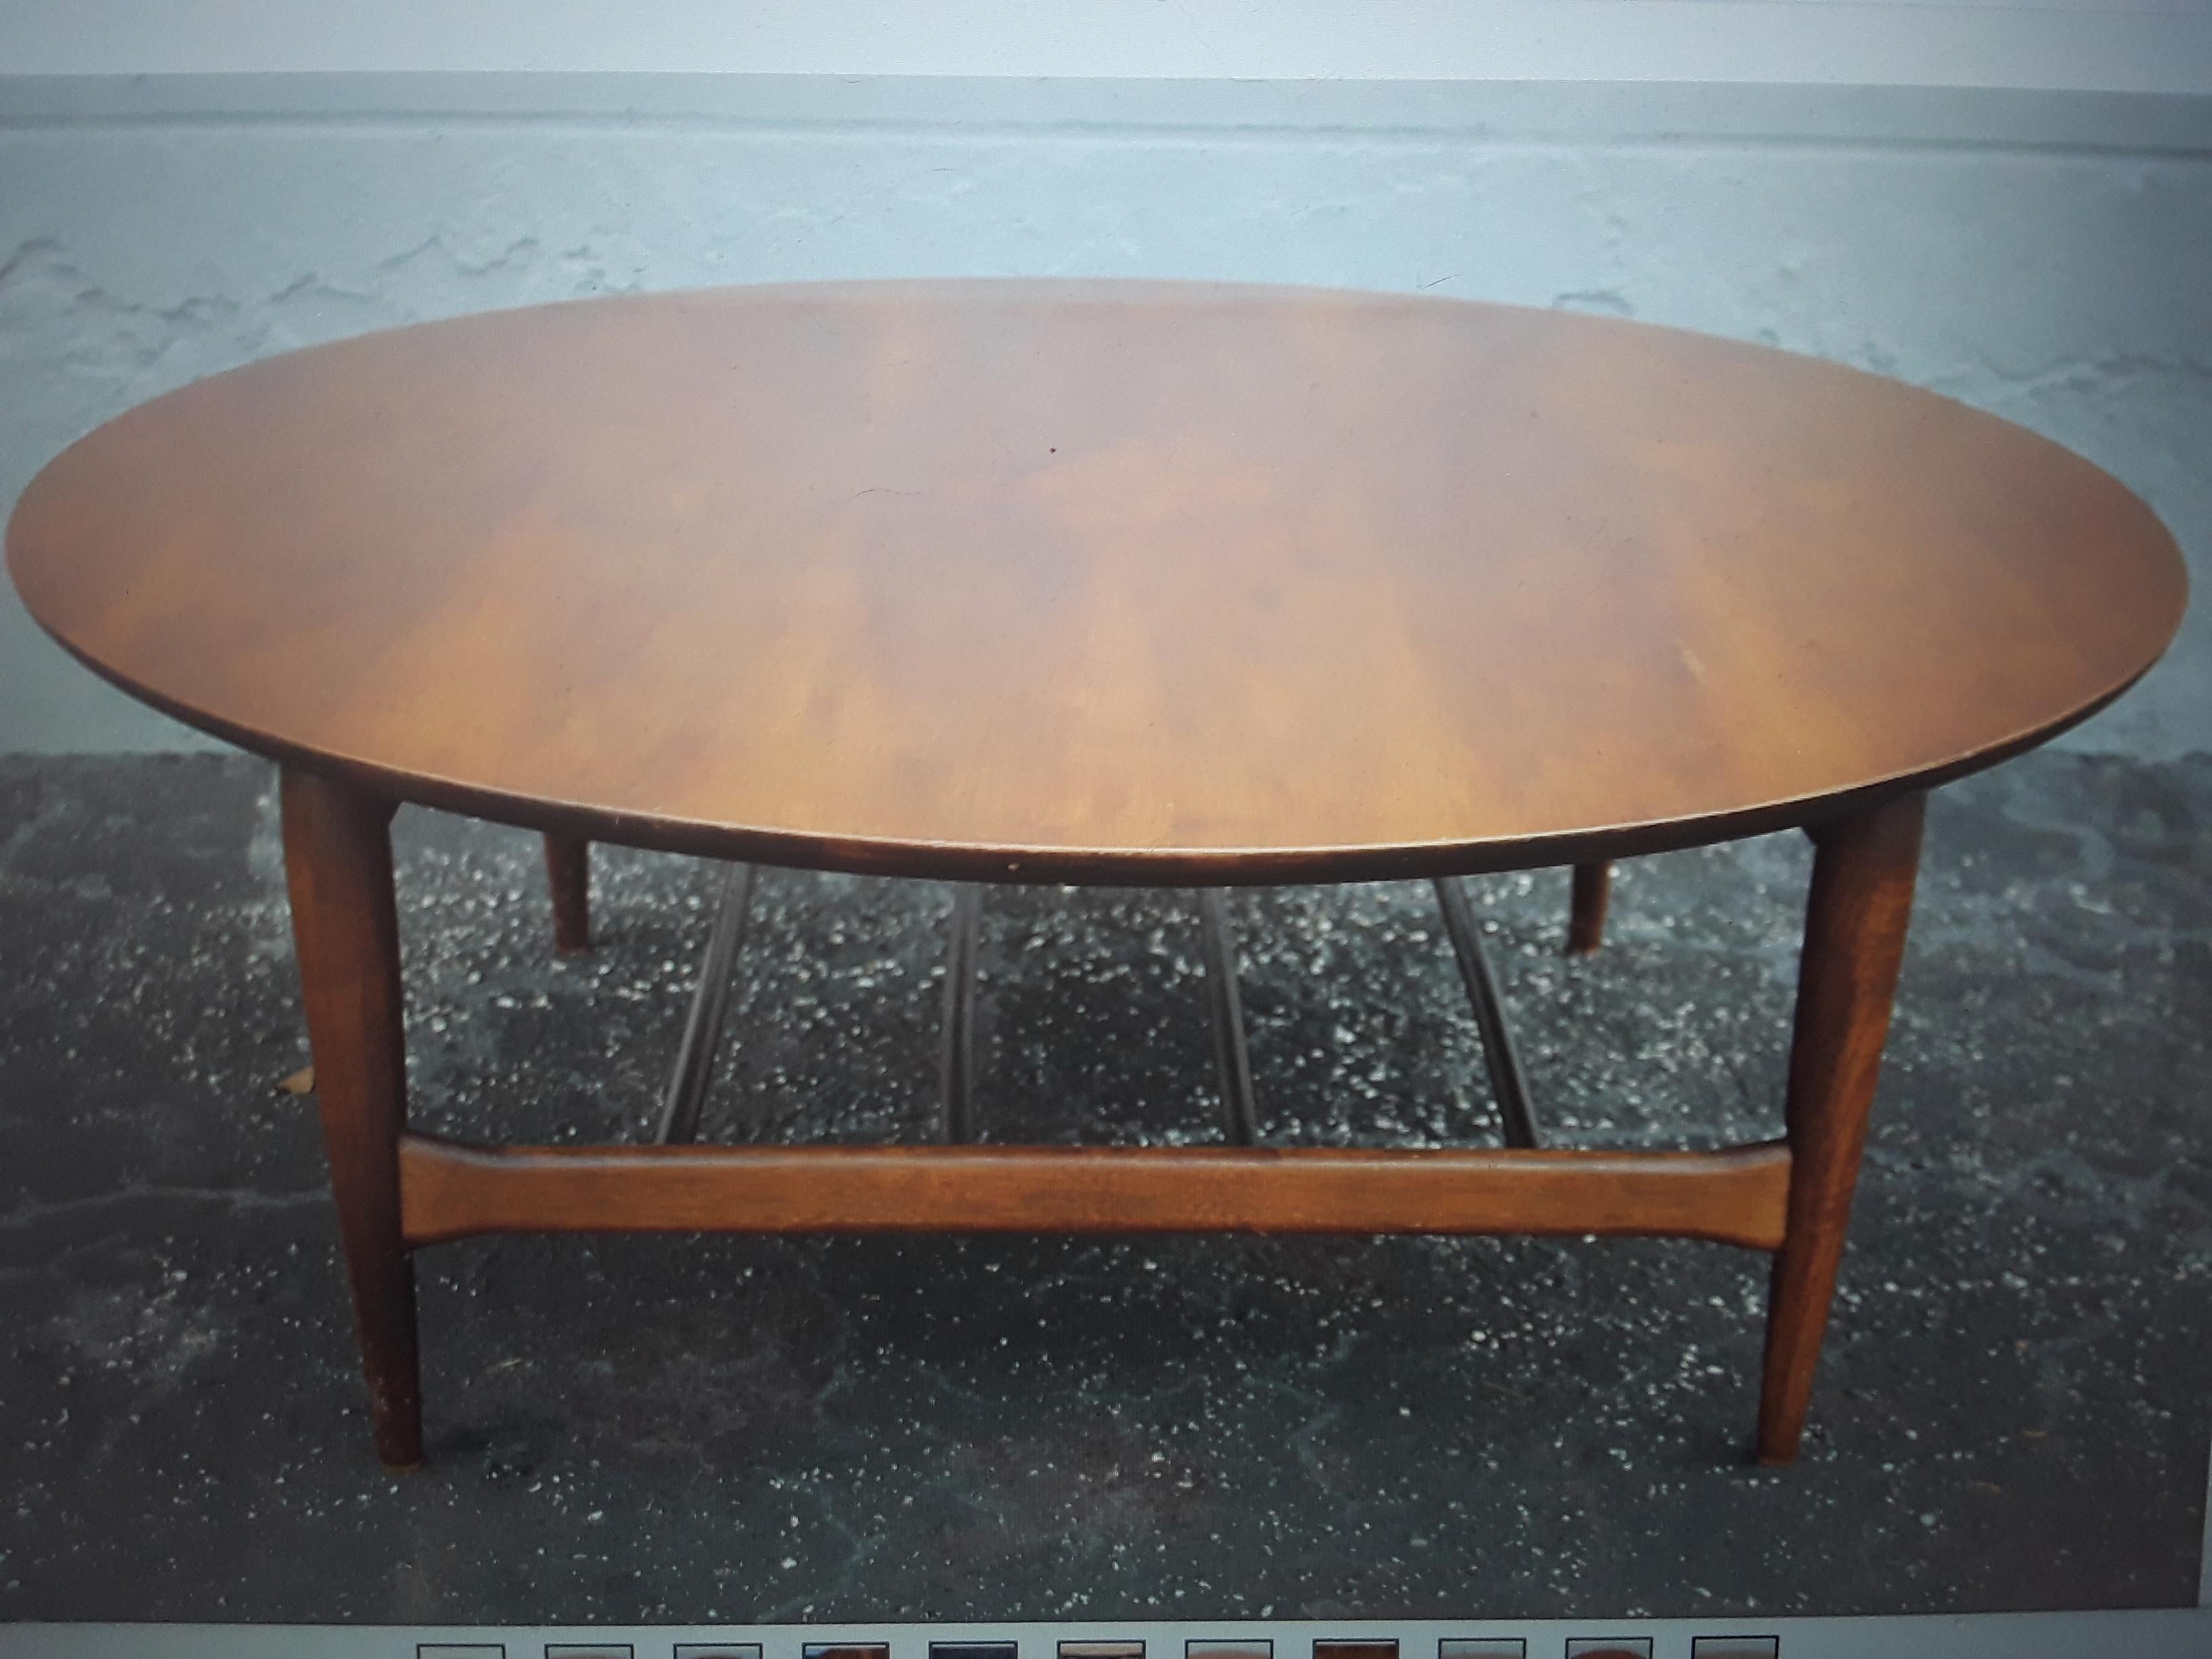 1940s Hollywood Regency Mahogany Coffee/ Cocktail Table. Storage space.
Stunning Table.